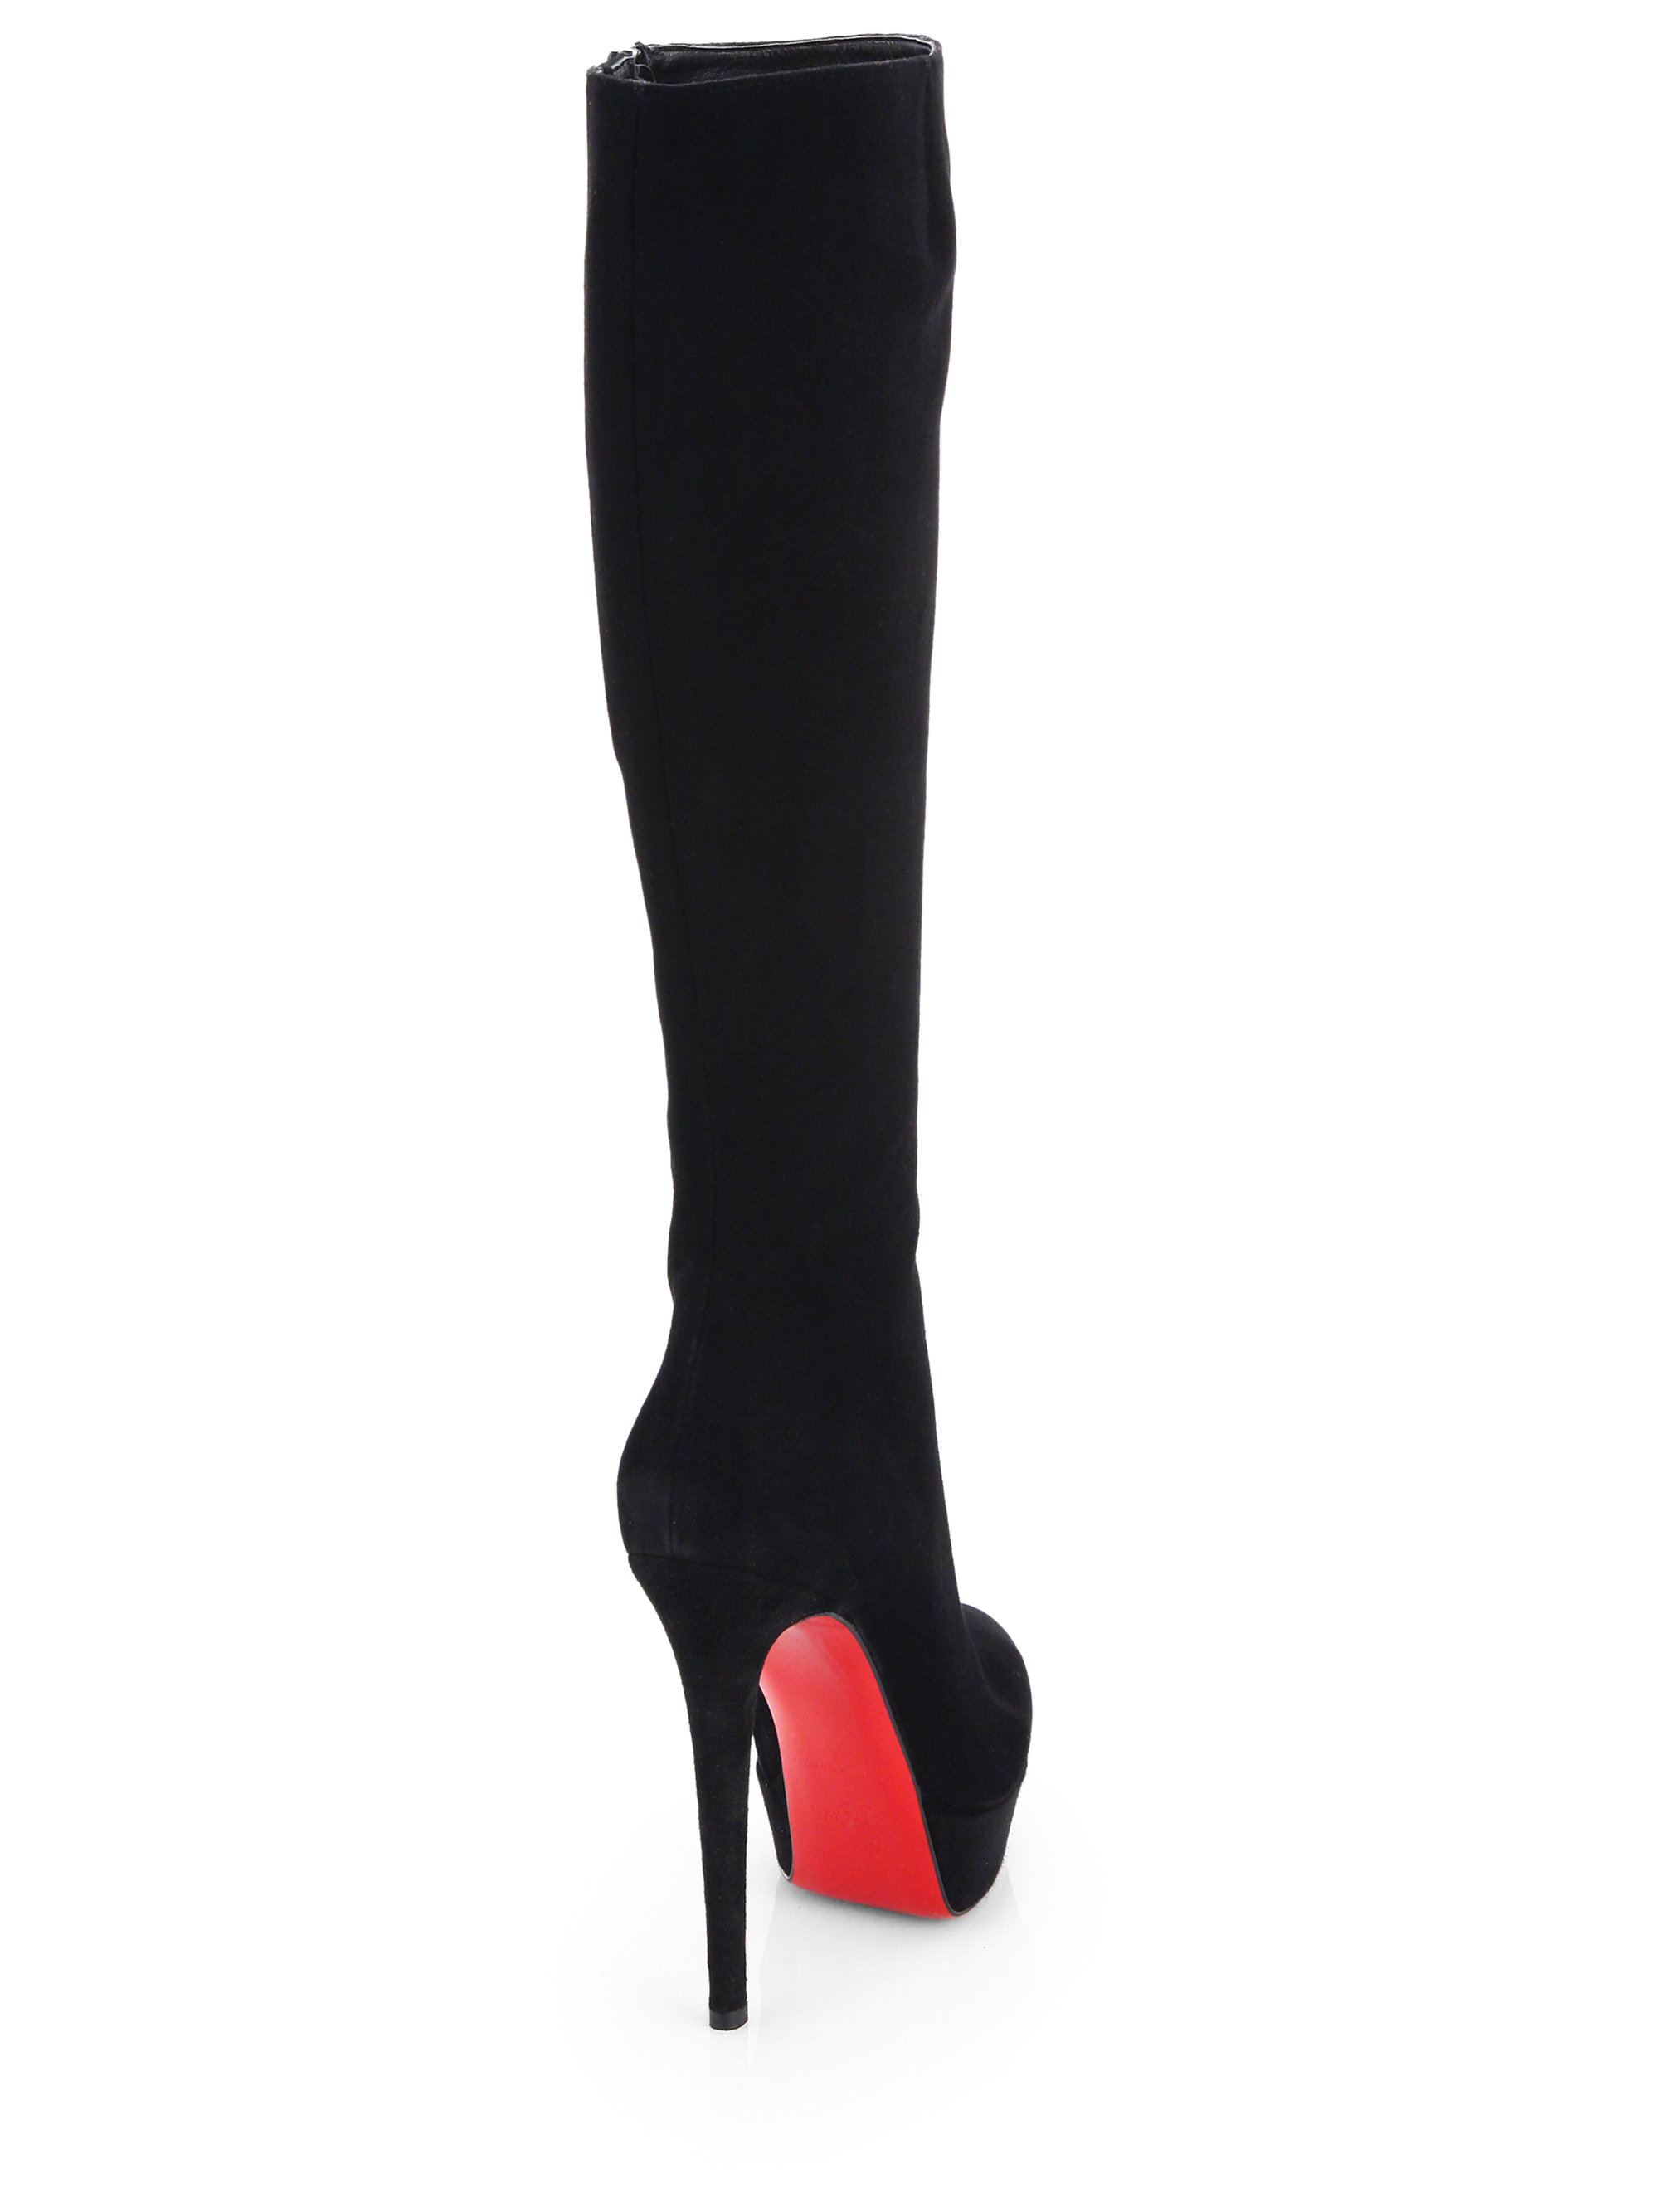 Artesur » christian louboutin knee-high boots Black suede covered heels